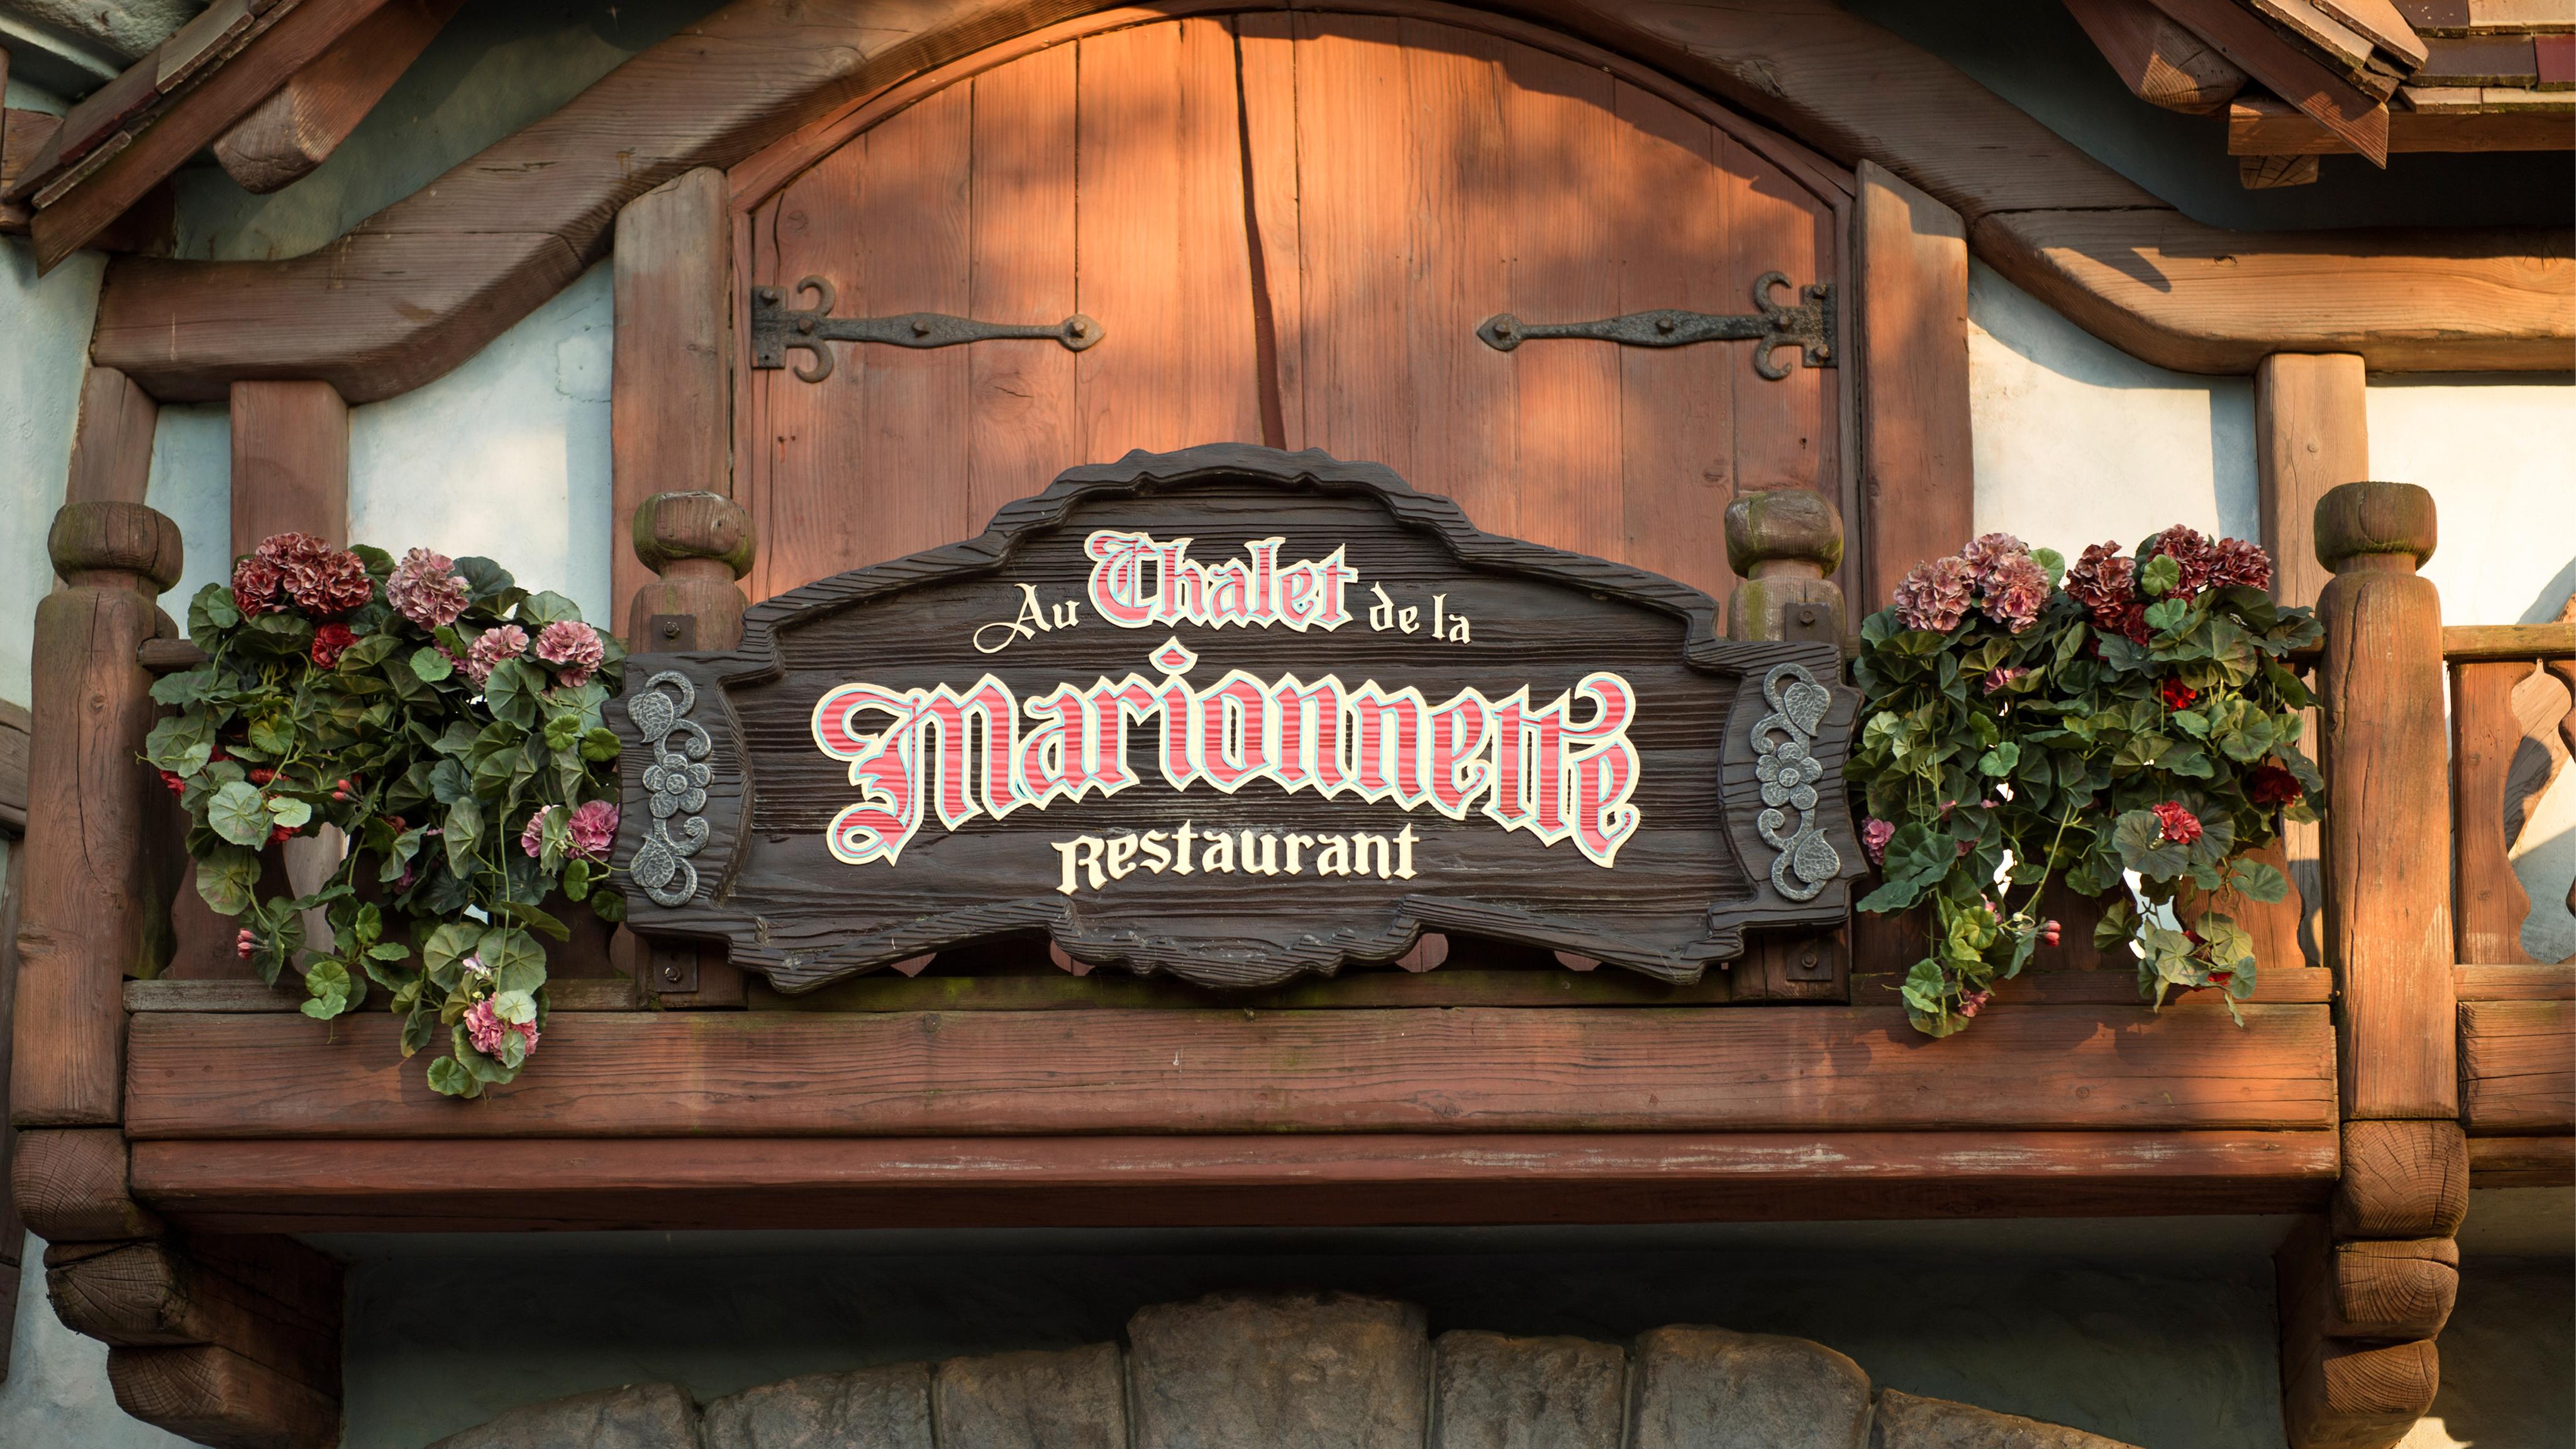 Image of this restaurant